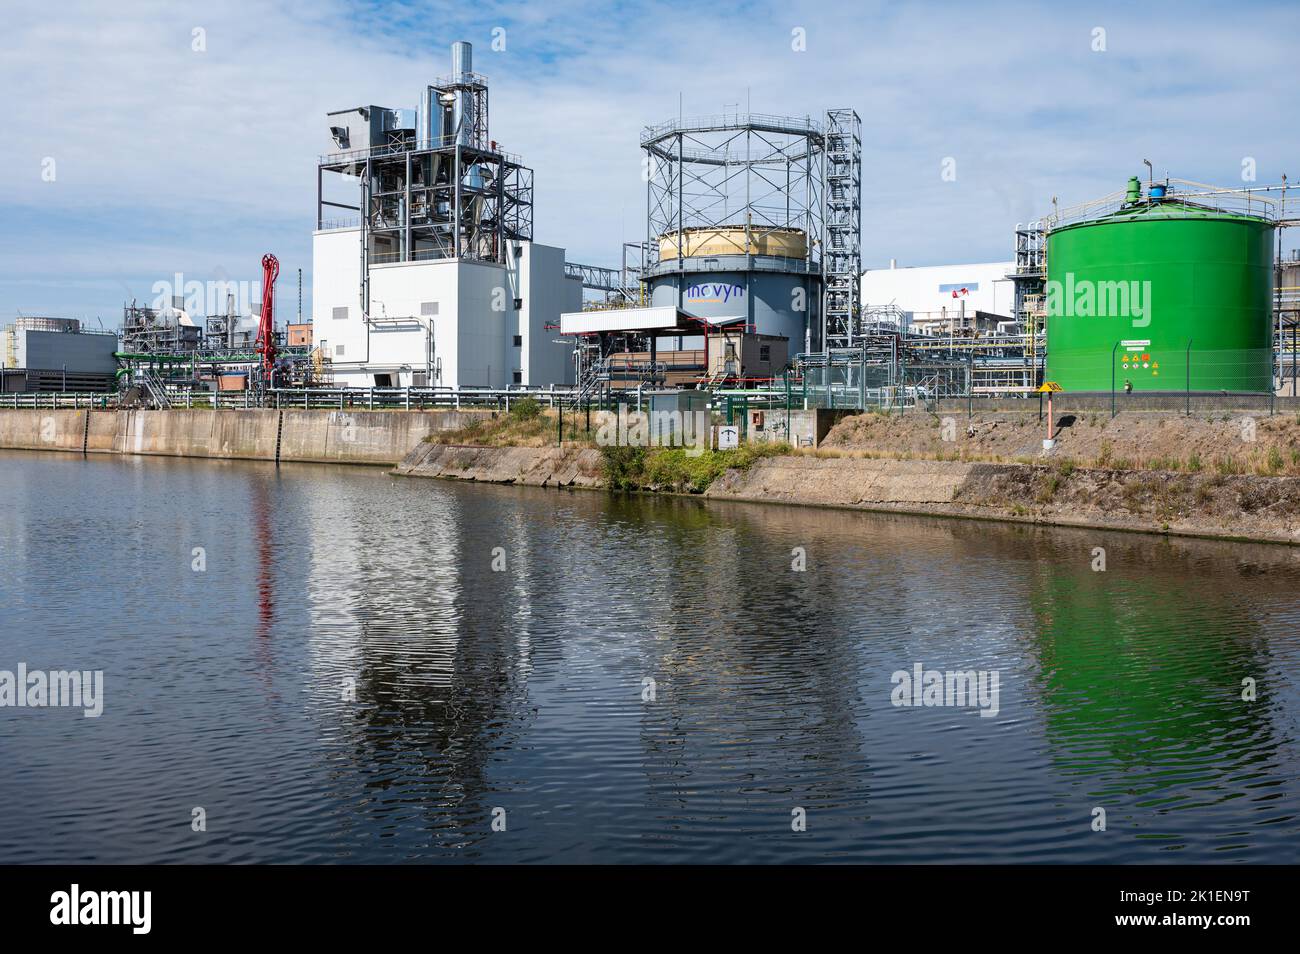 Jemeppe-Sur-Sambre, Wallon Region, Belgium, 07 29 2022 - The Ineos company industrial plant for the production of vinyl and organic chlorine derivates Stock Photo